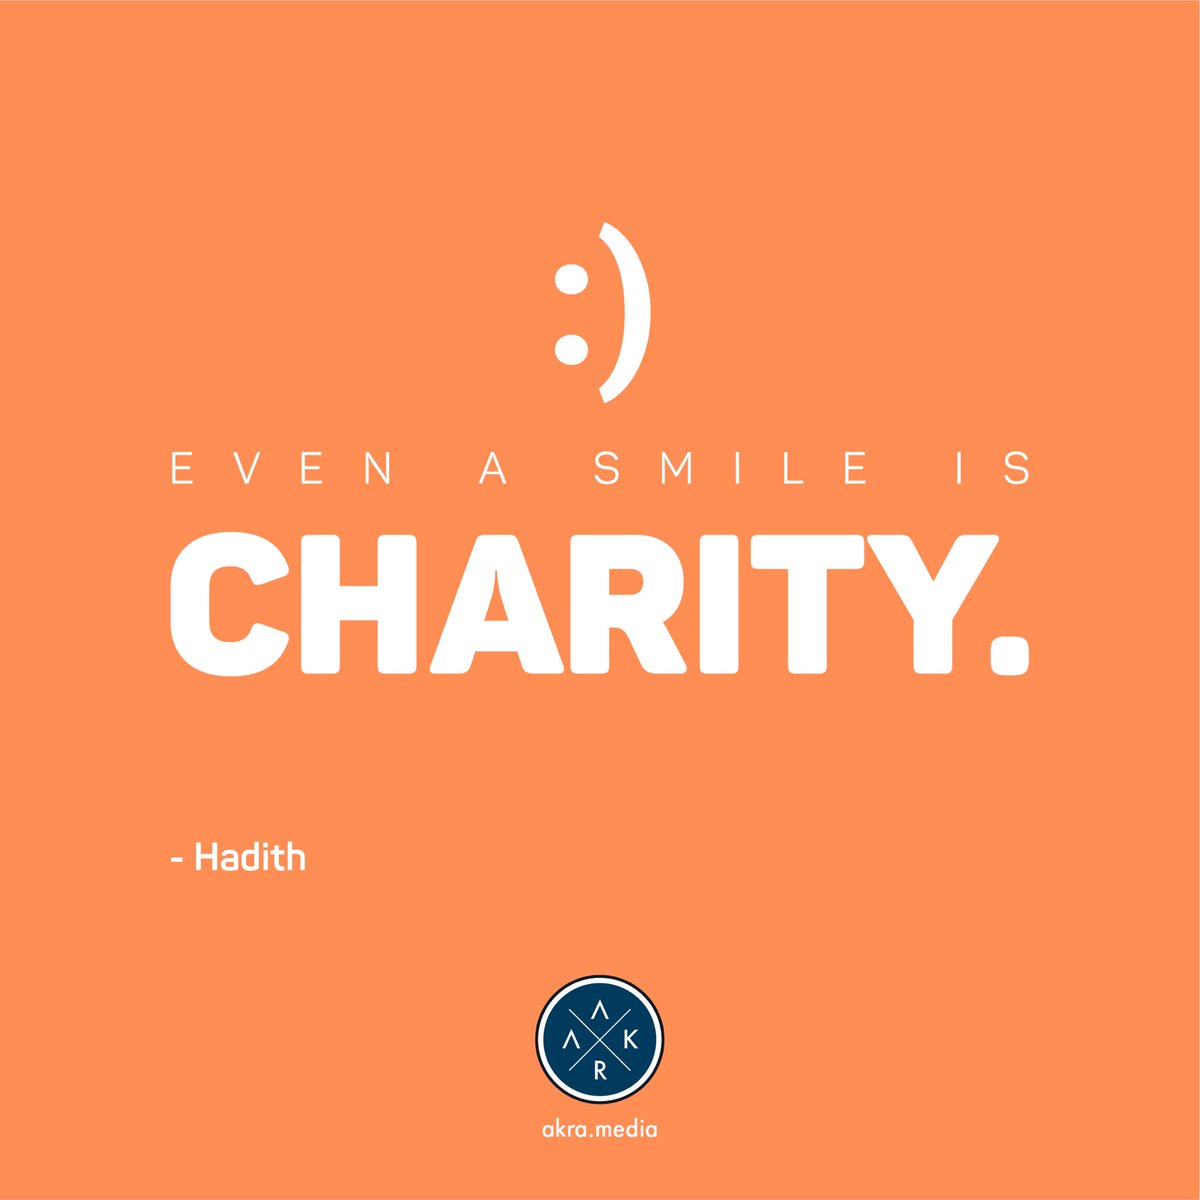 Even a smile is charity. 😊
- Hadith

#hadith #prophetmuhammad #prophetmuhammadsayings #smile #charity #sadaqa #islam #innerpeace